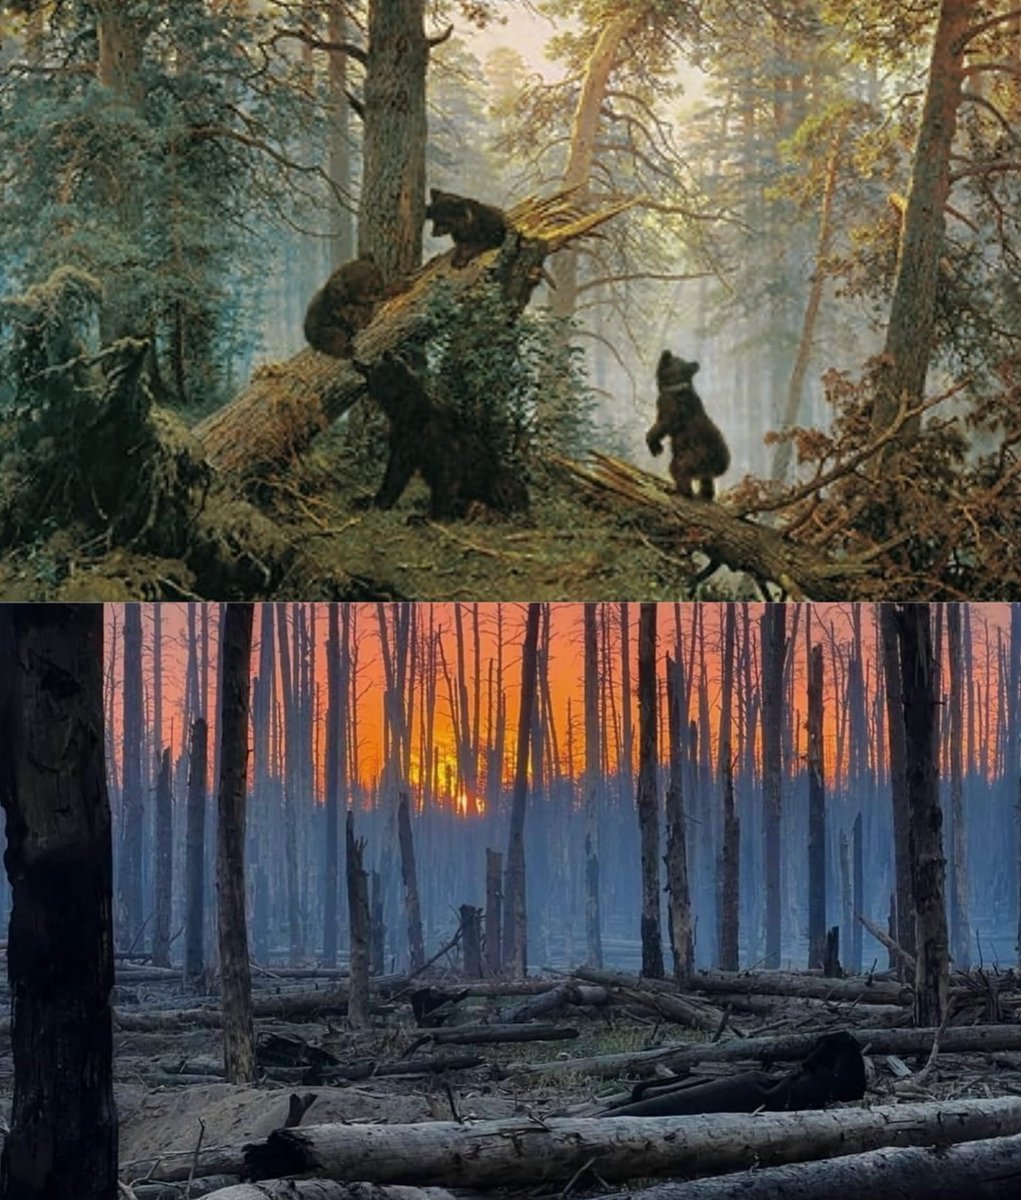 > What a promo of Russian culture looks like > What the Ukrainian nature reserve looks like after the arrival of the carriers of this 'culture' ('Morning in a Pine Forest' by Shishkin / Serebryansky Nature Reserve in Luhansk region, Ukraine) via @ragulivna